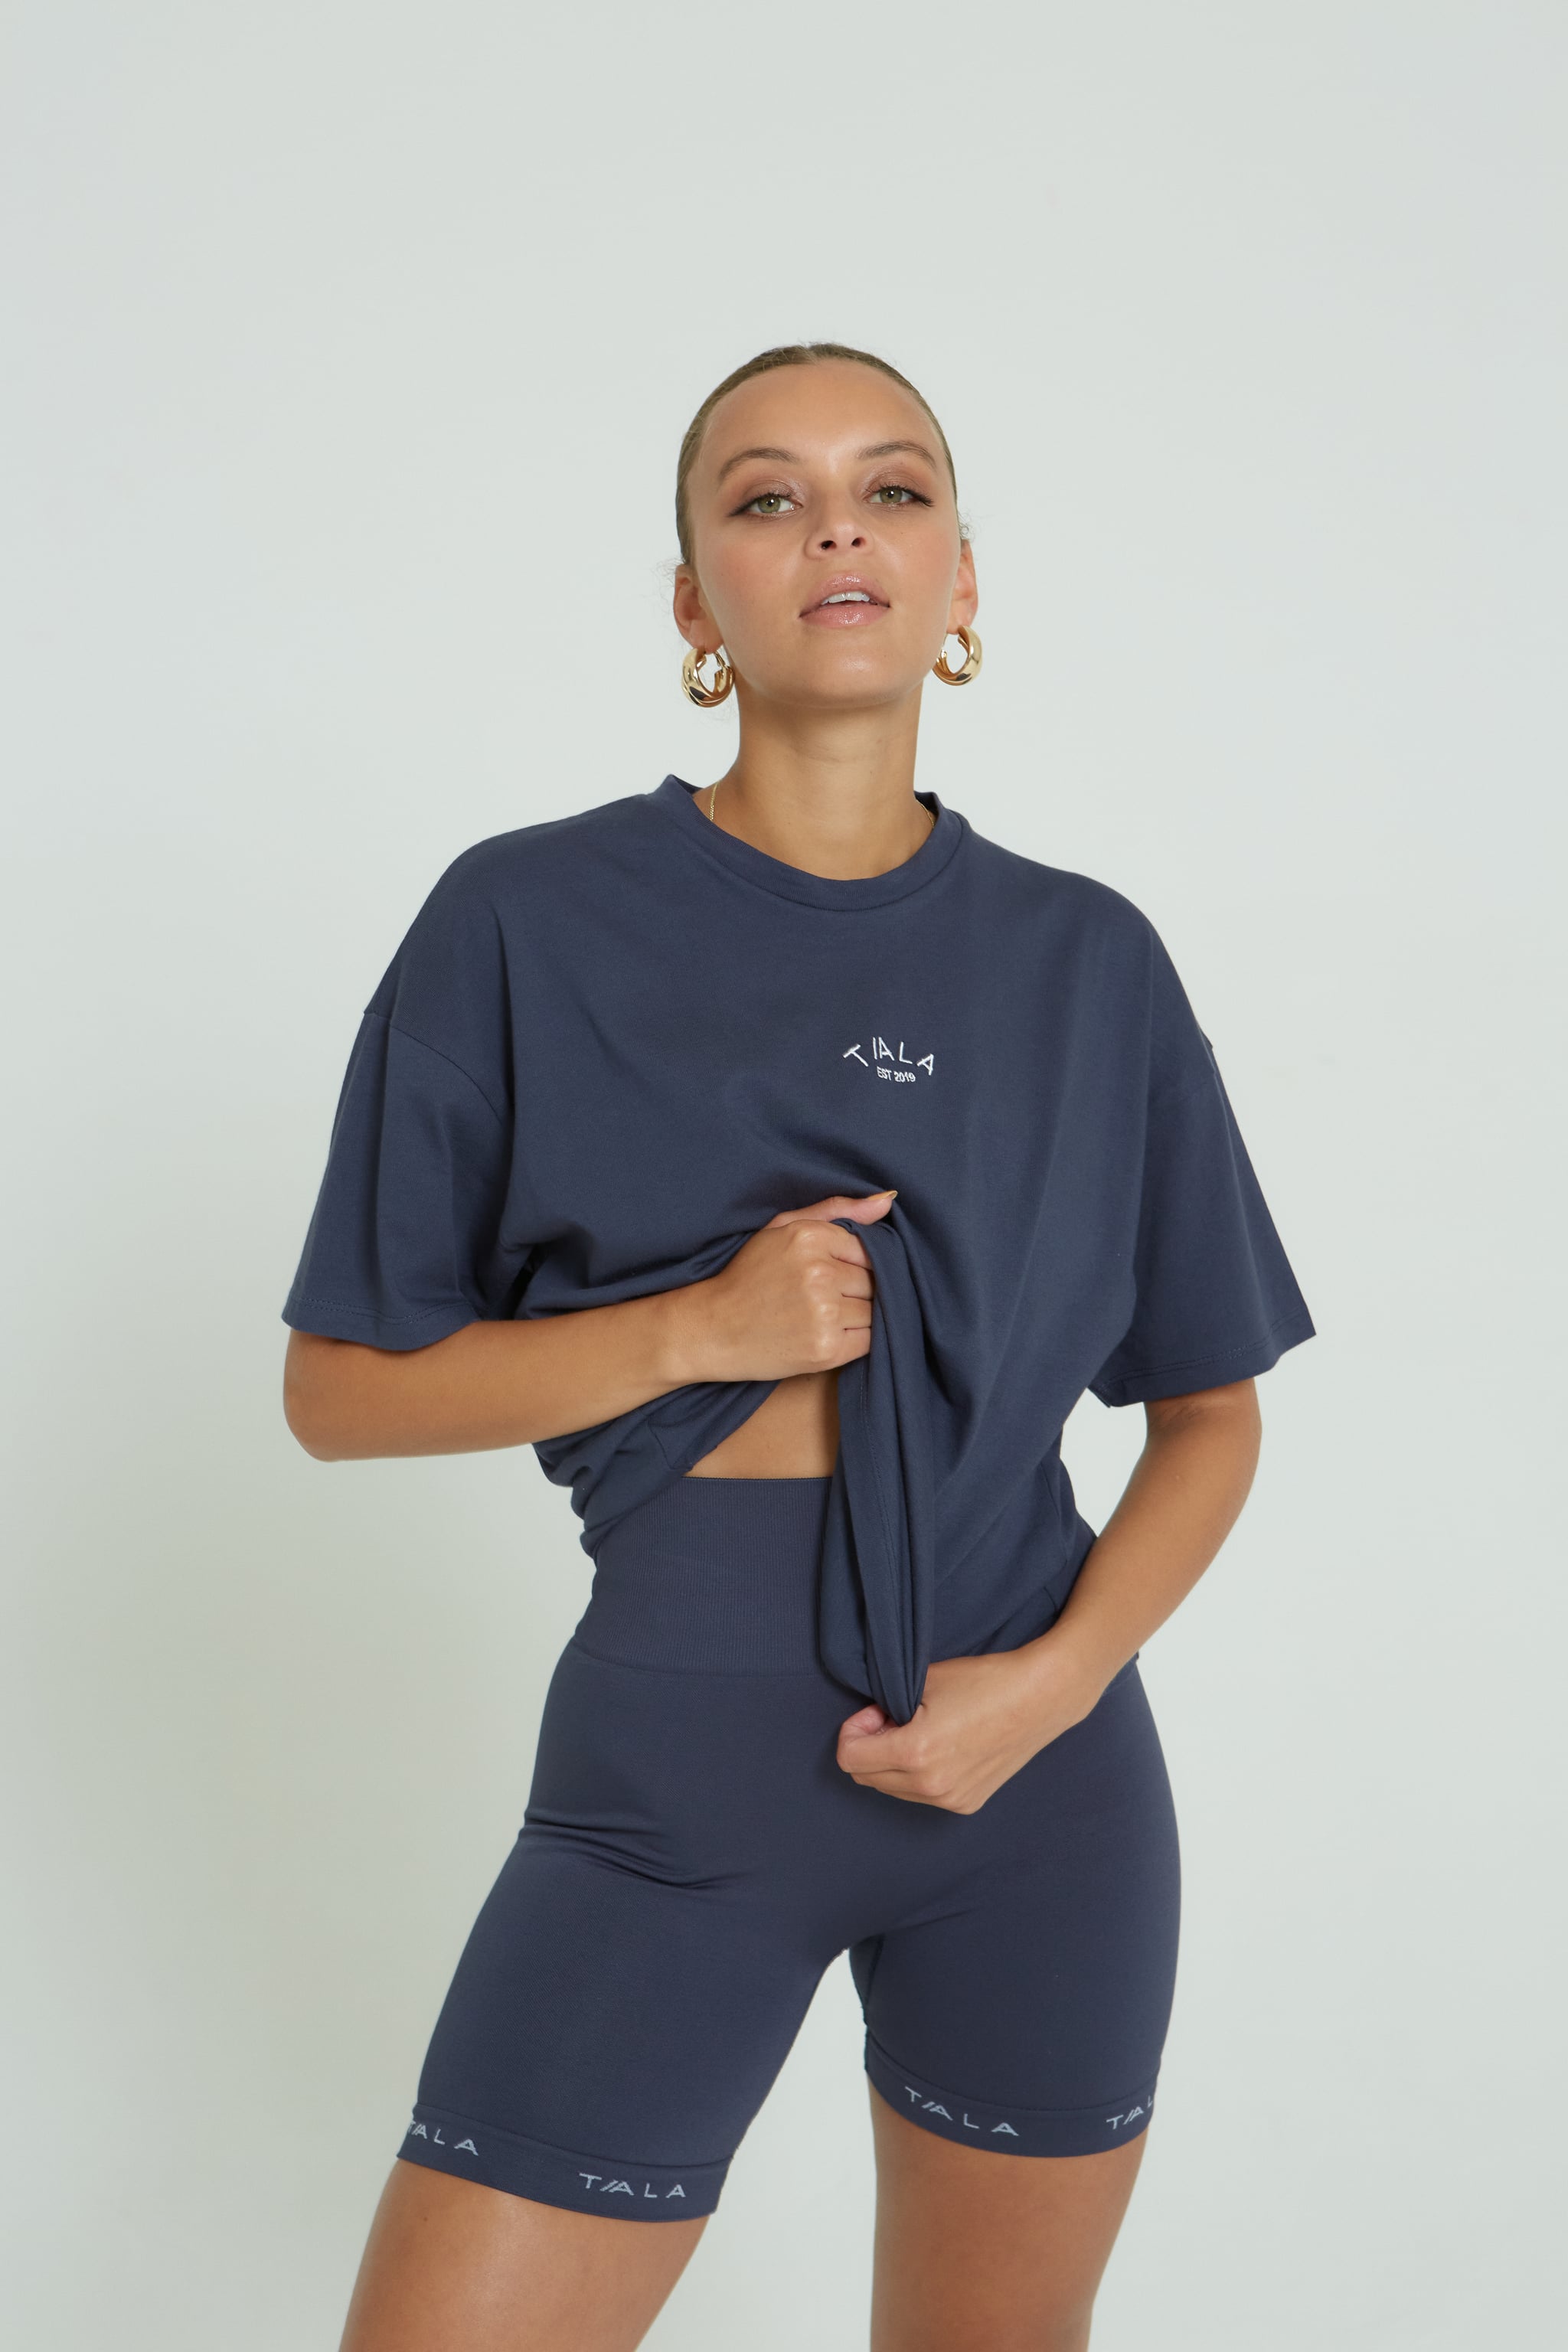 TALA Launches Court, a Vintage-Inspired Athleisure Range